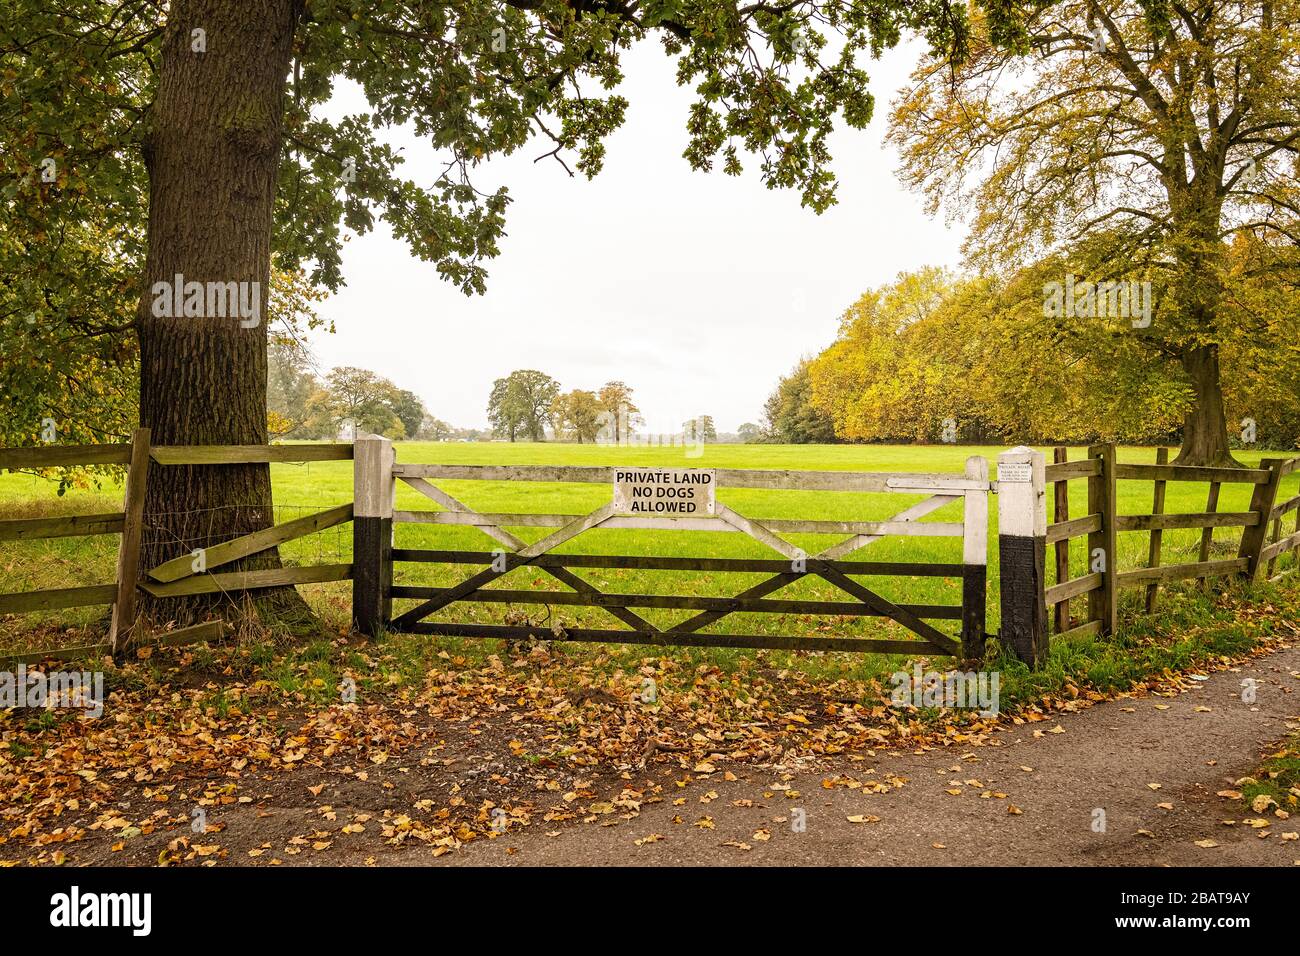 Private land, no dogs allowed, sign on farm land gate in Cheshire UK Stock Photo